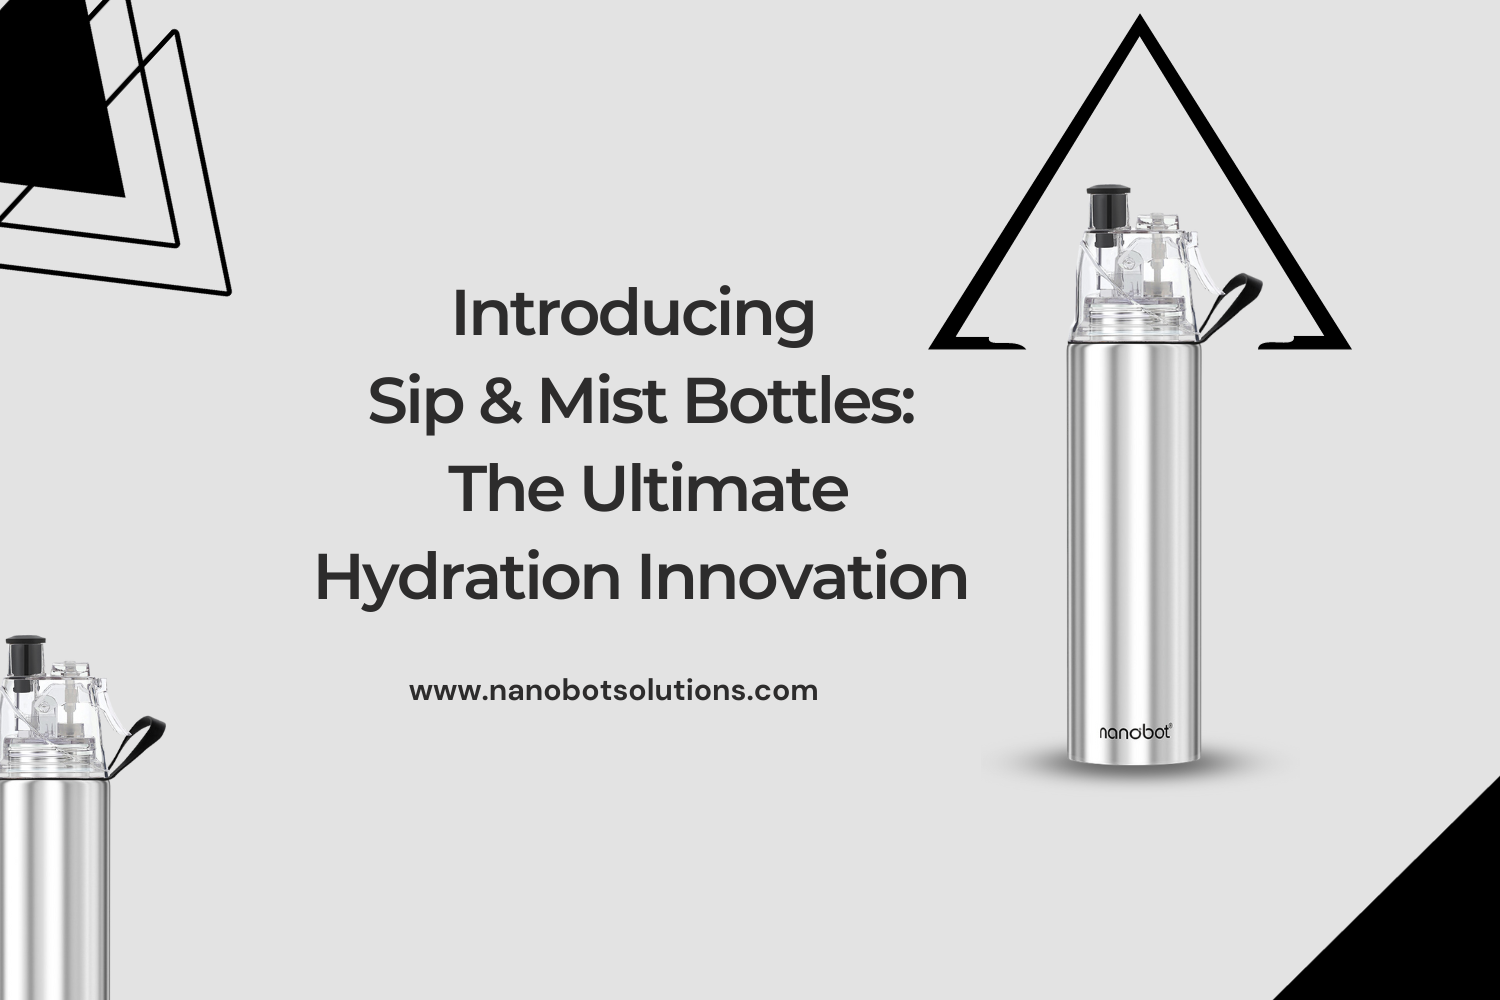 Introducing-Sip-Mist-Bottles_-The-Ultimate-Hydration-Innovation.